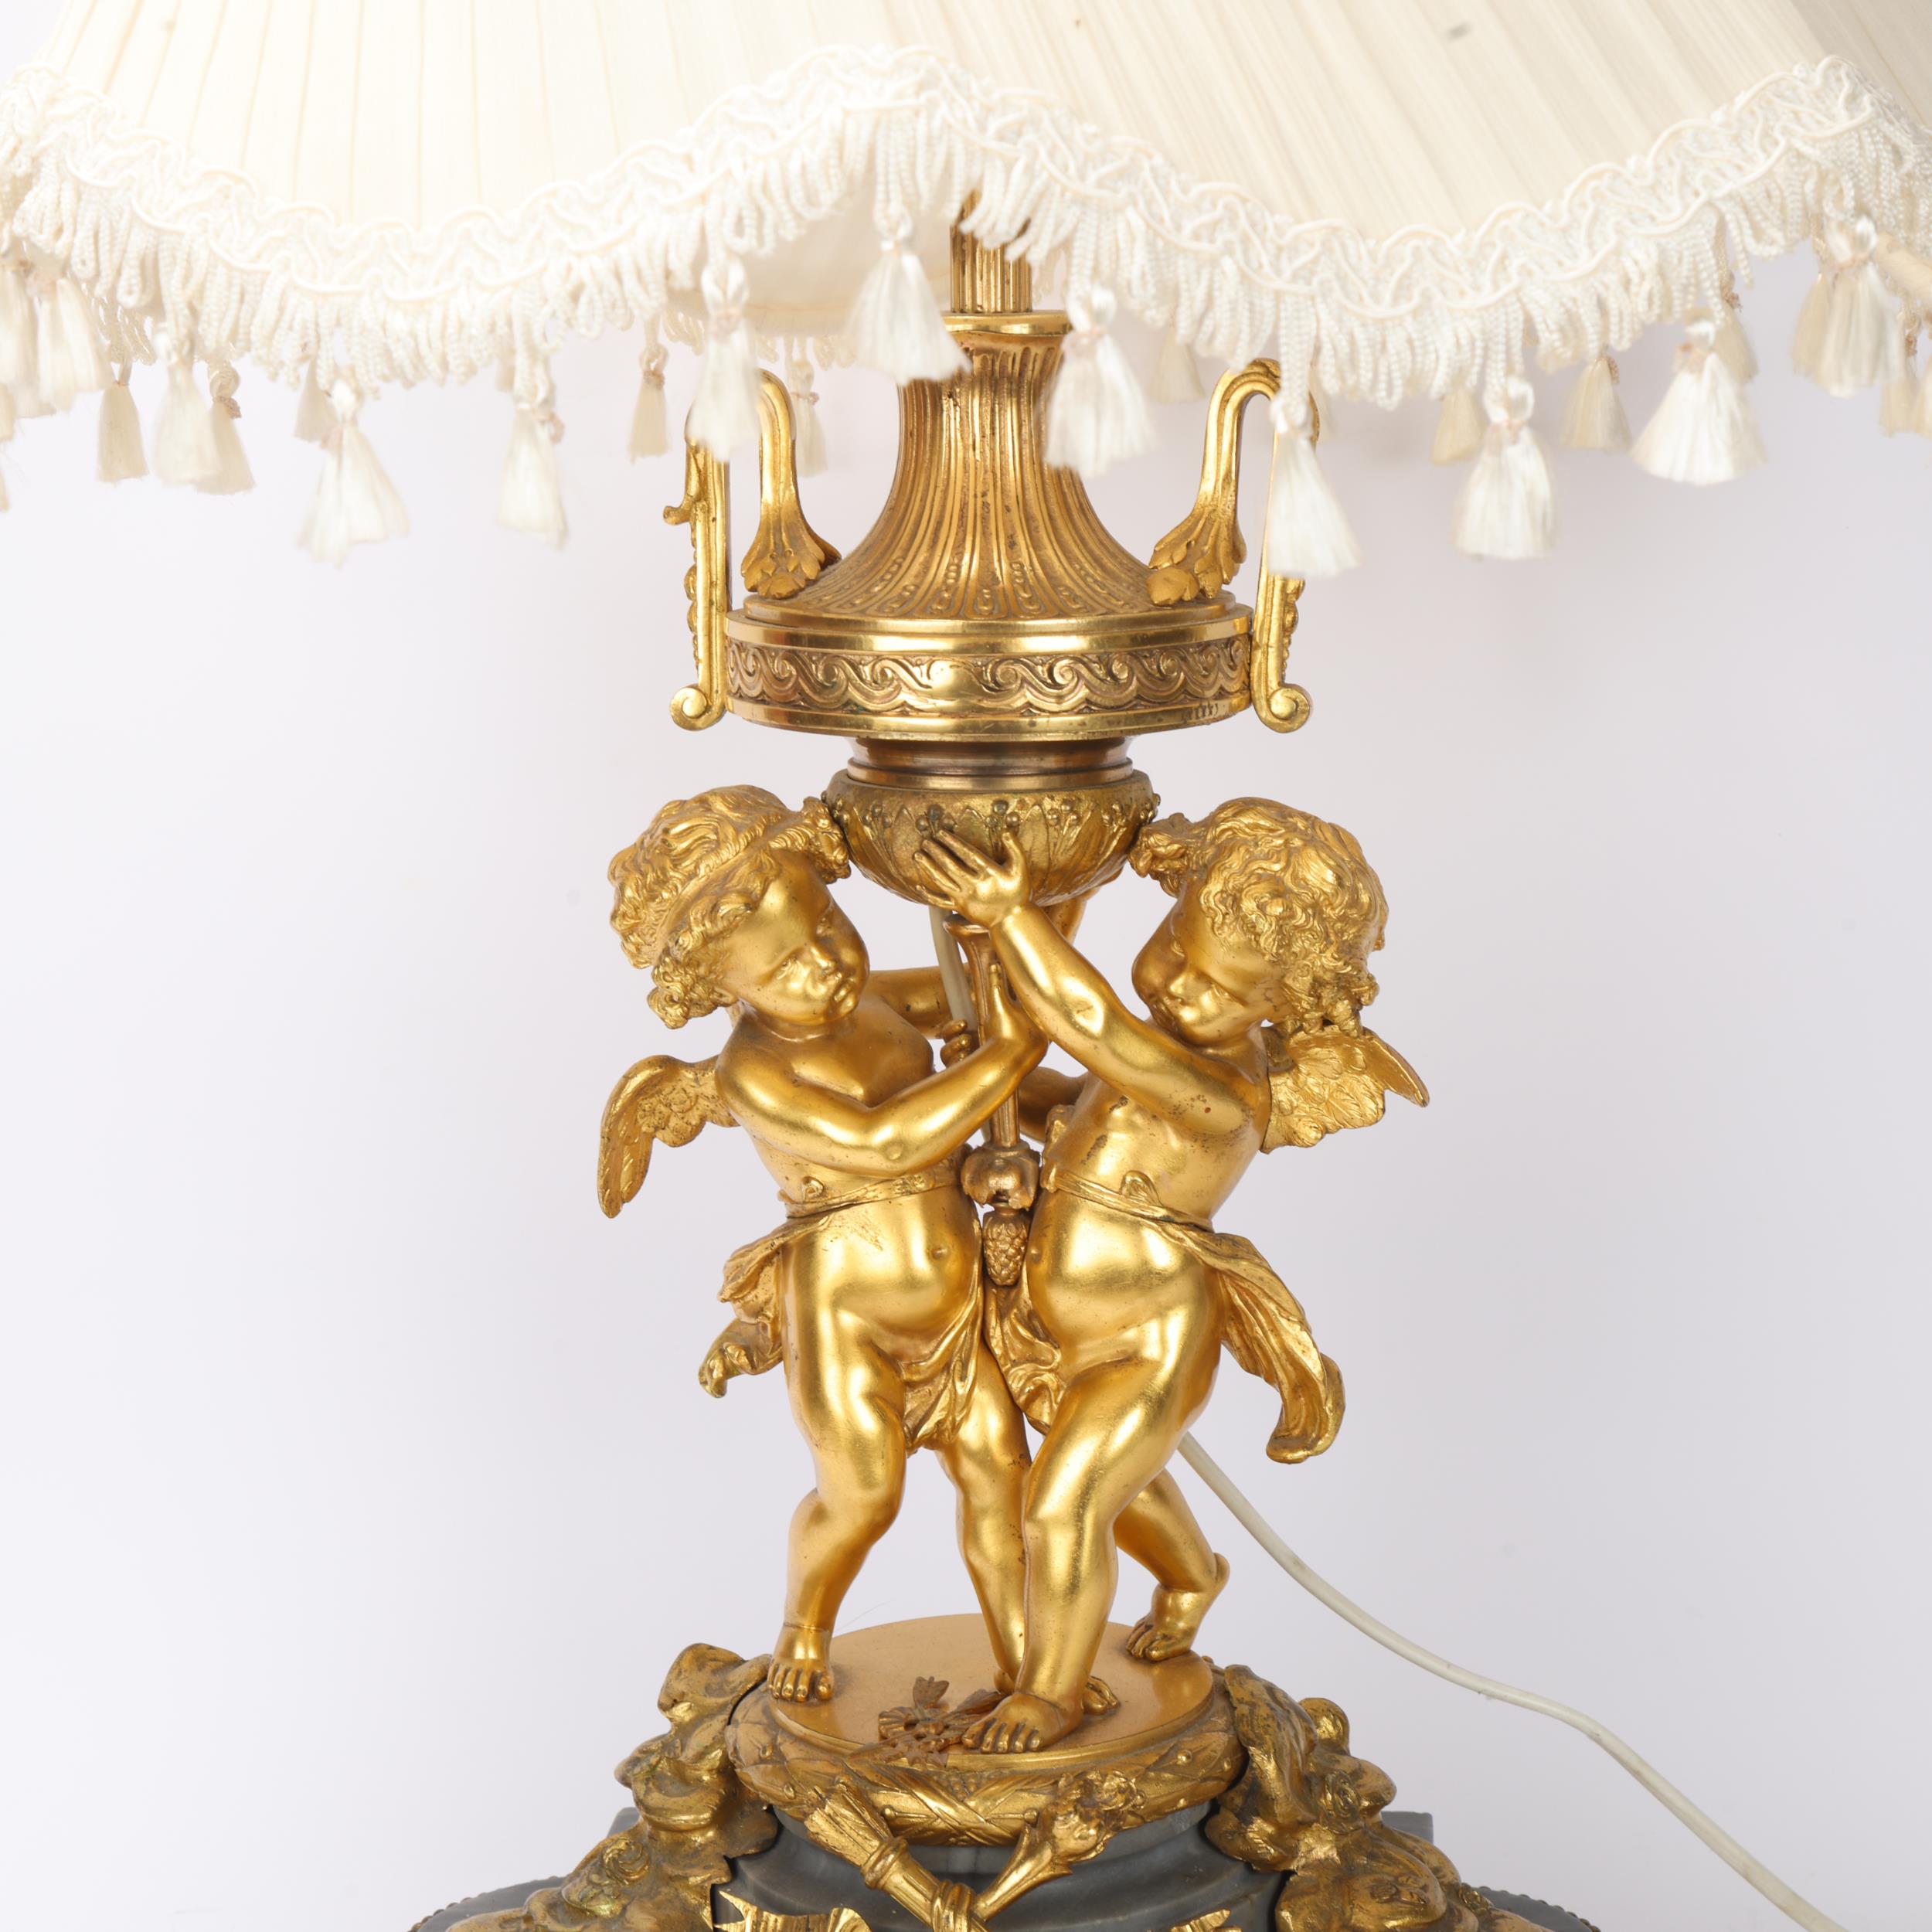 An ornate French gilt-bronze table lamp, supported by 2 cherubs, probably late 19th century, on - Image 2 of 3